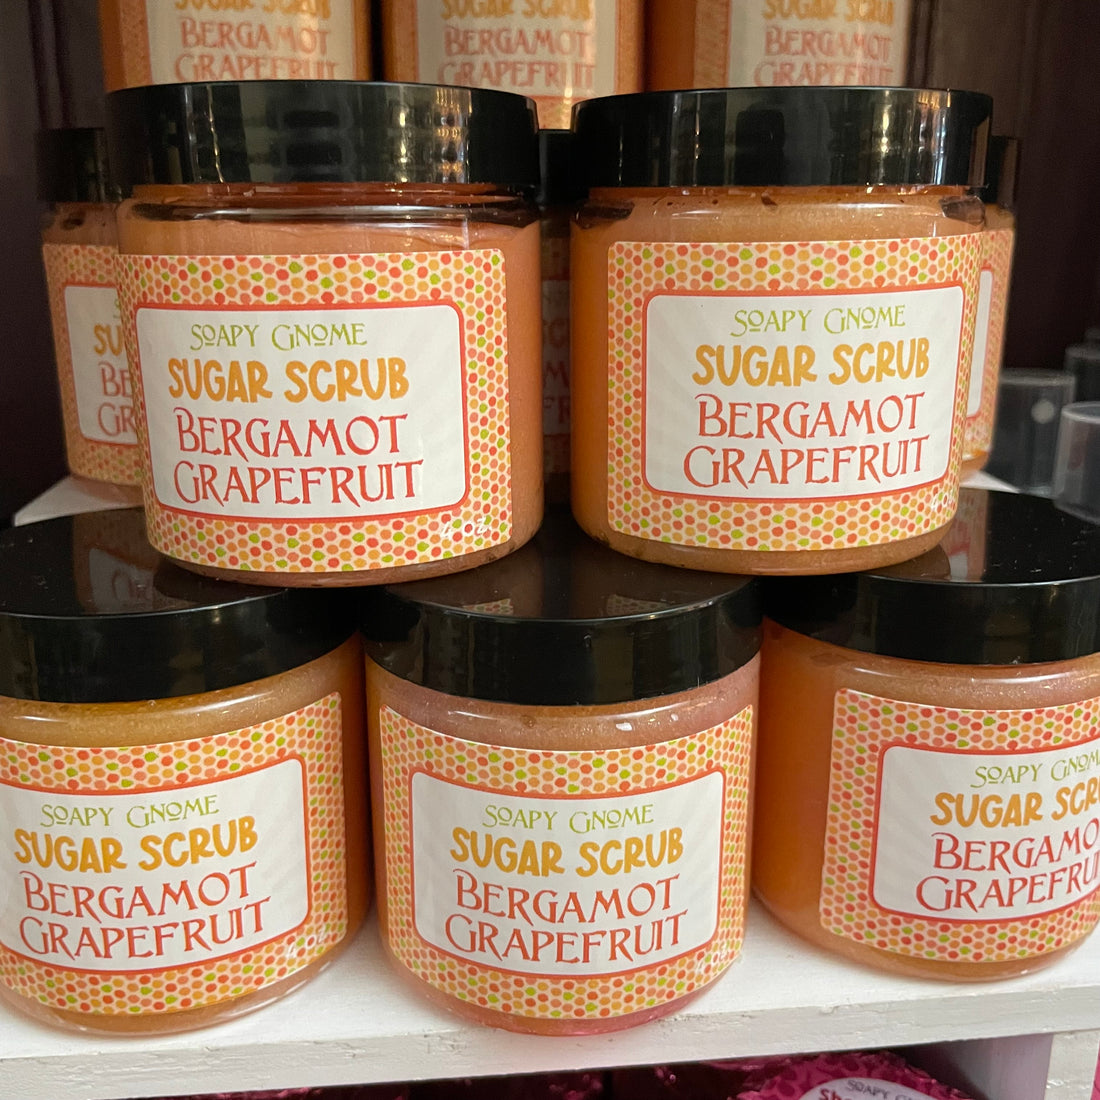 Scent of the Month Add-On: Sugar Scrub